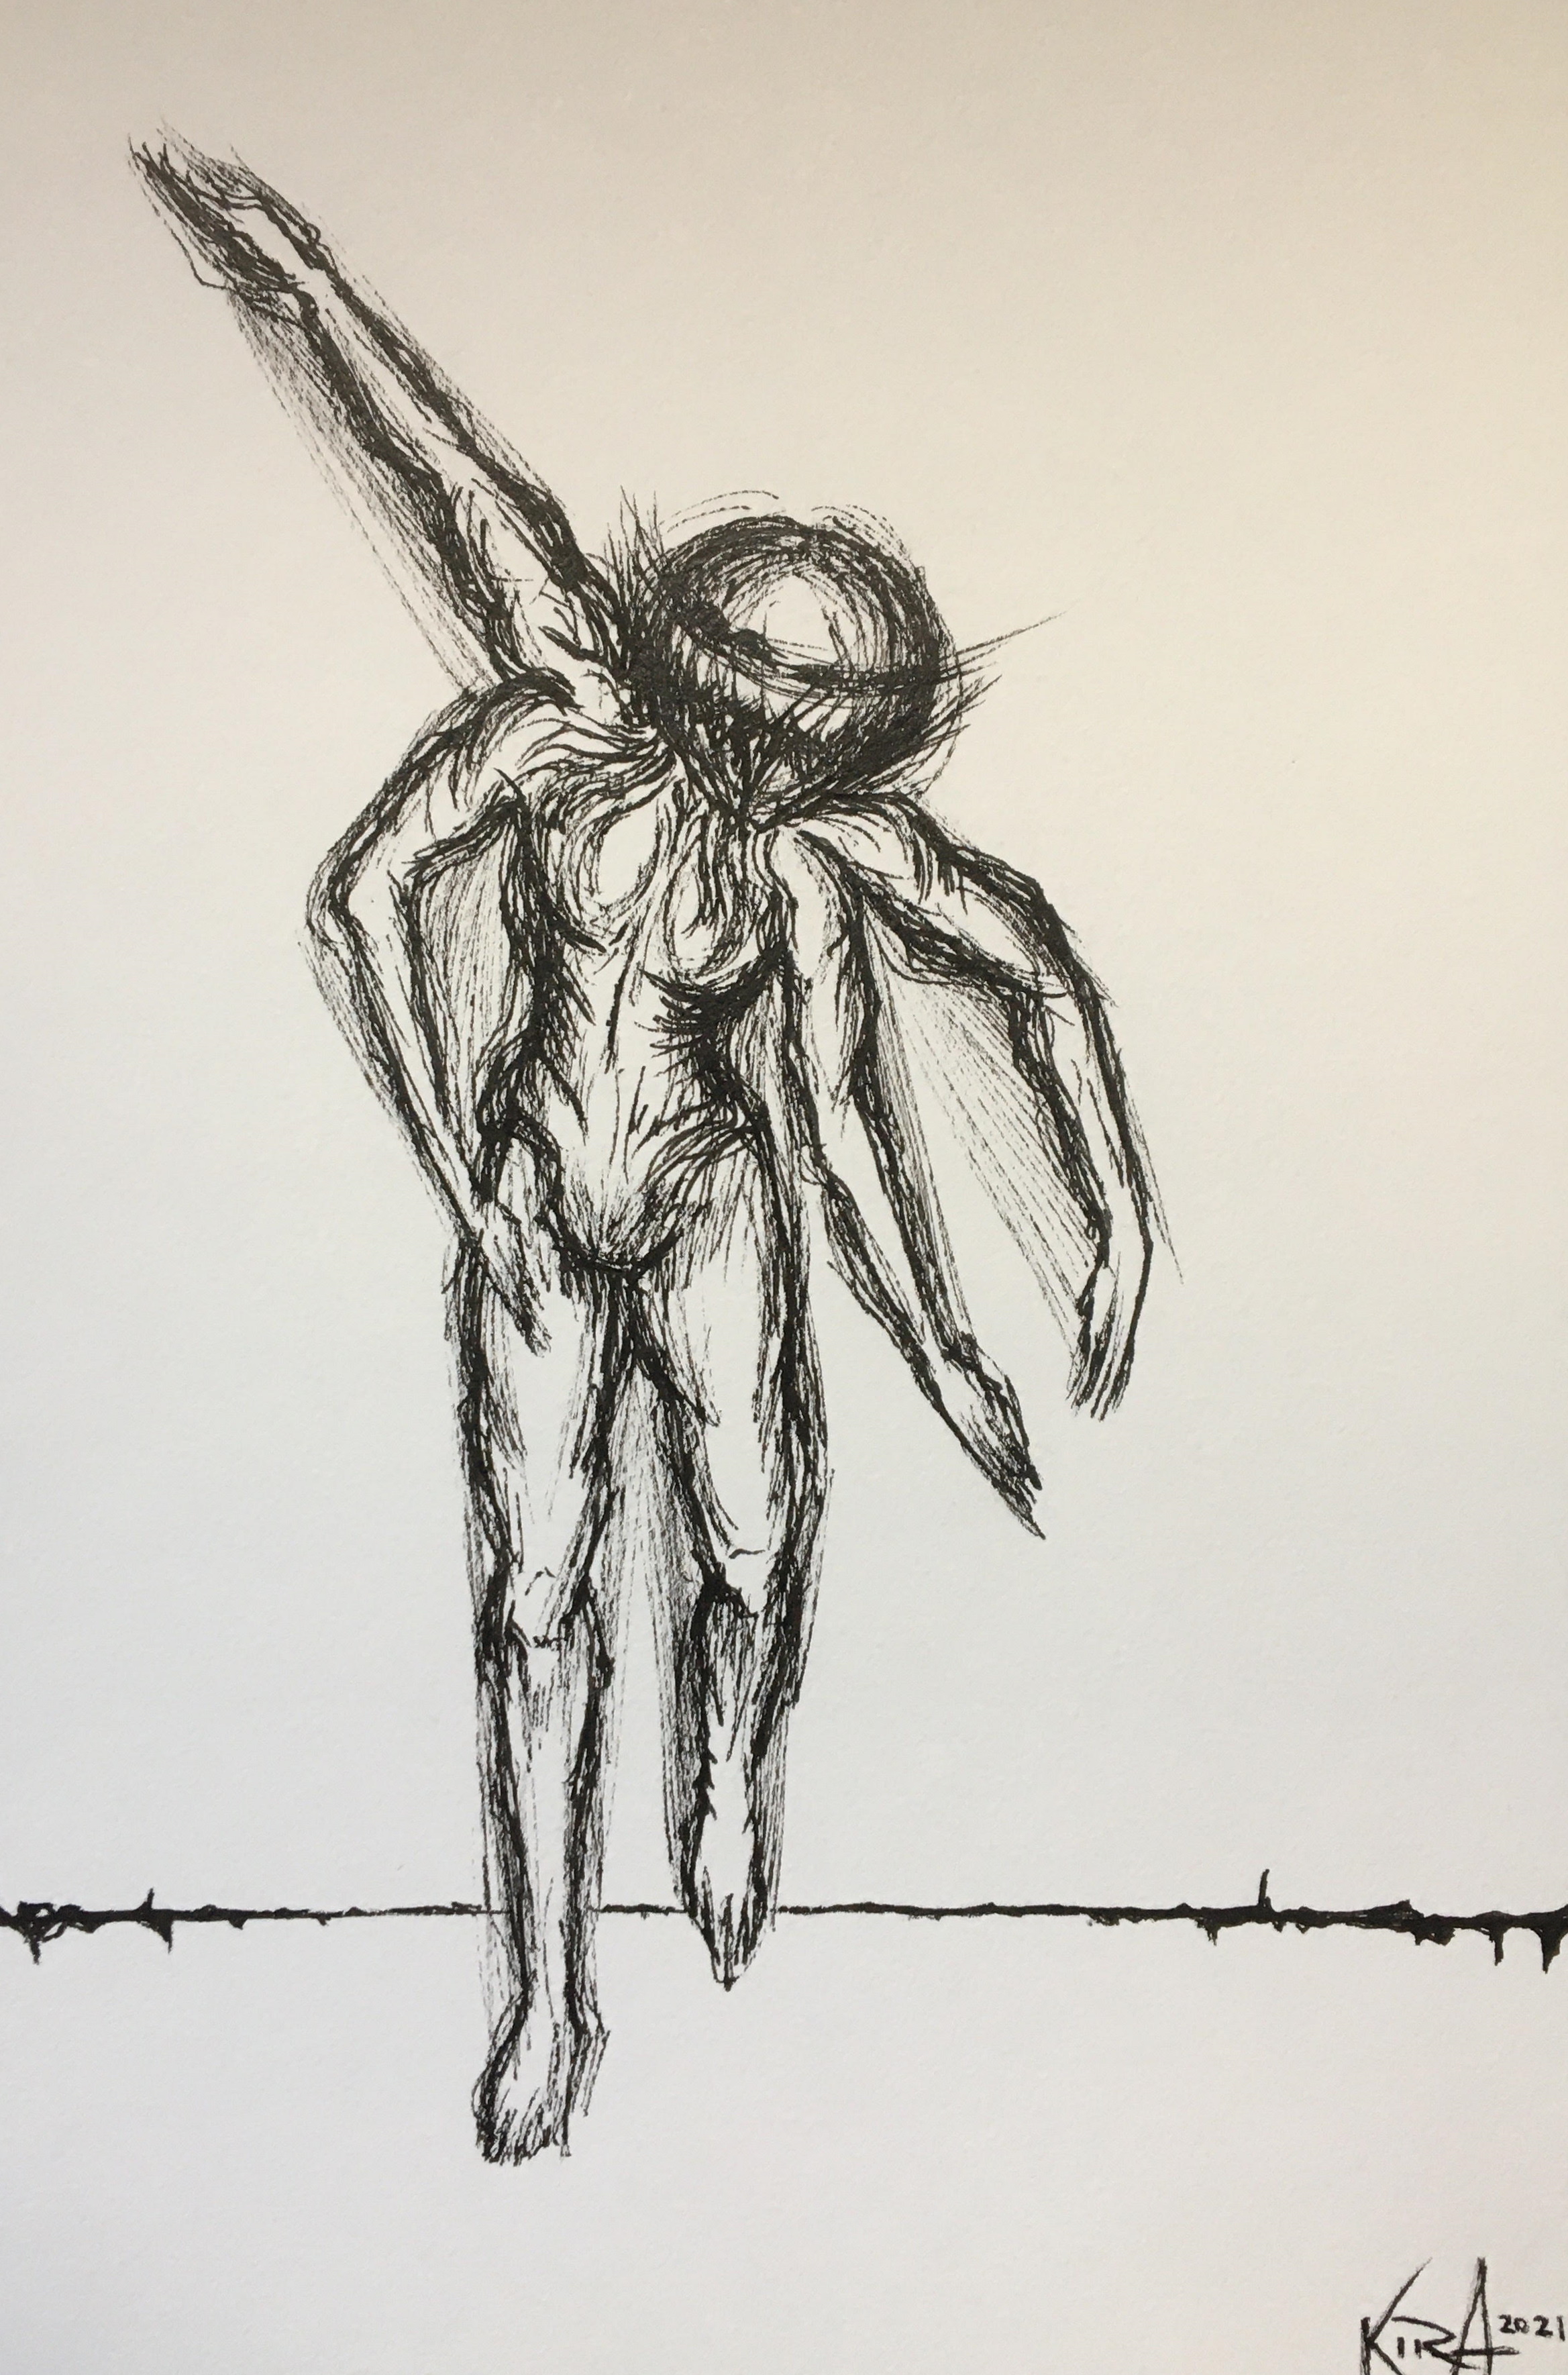 Drawing of a spectral figure with four arms, walking in an unclear motion